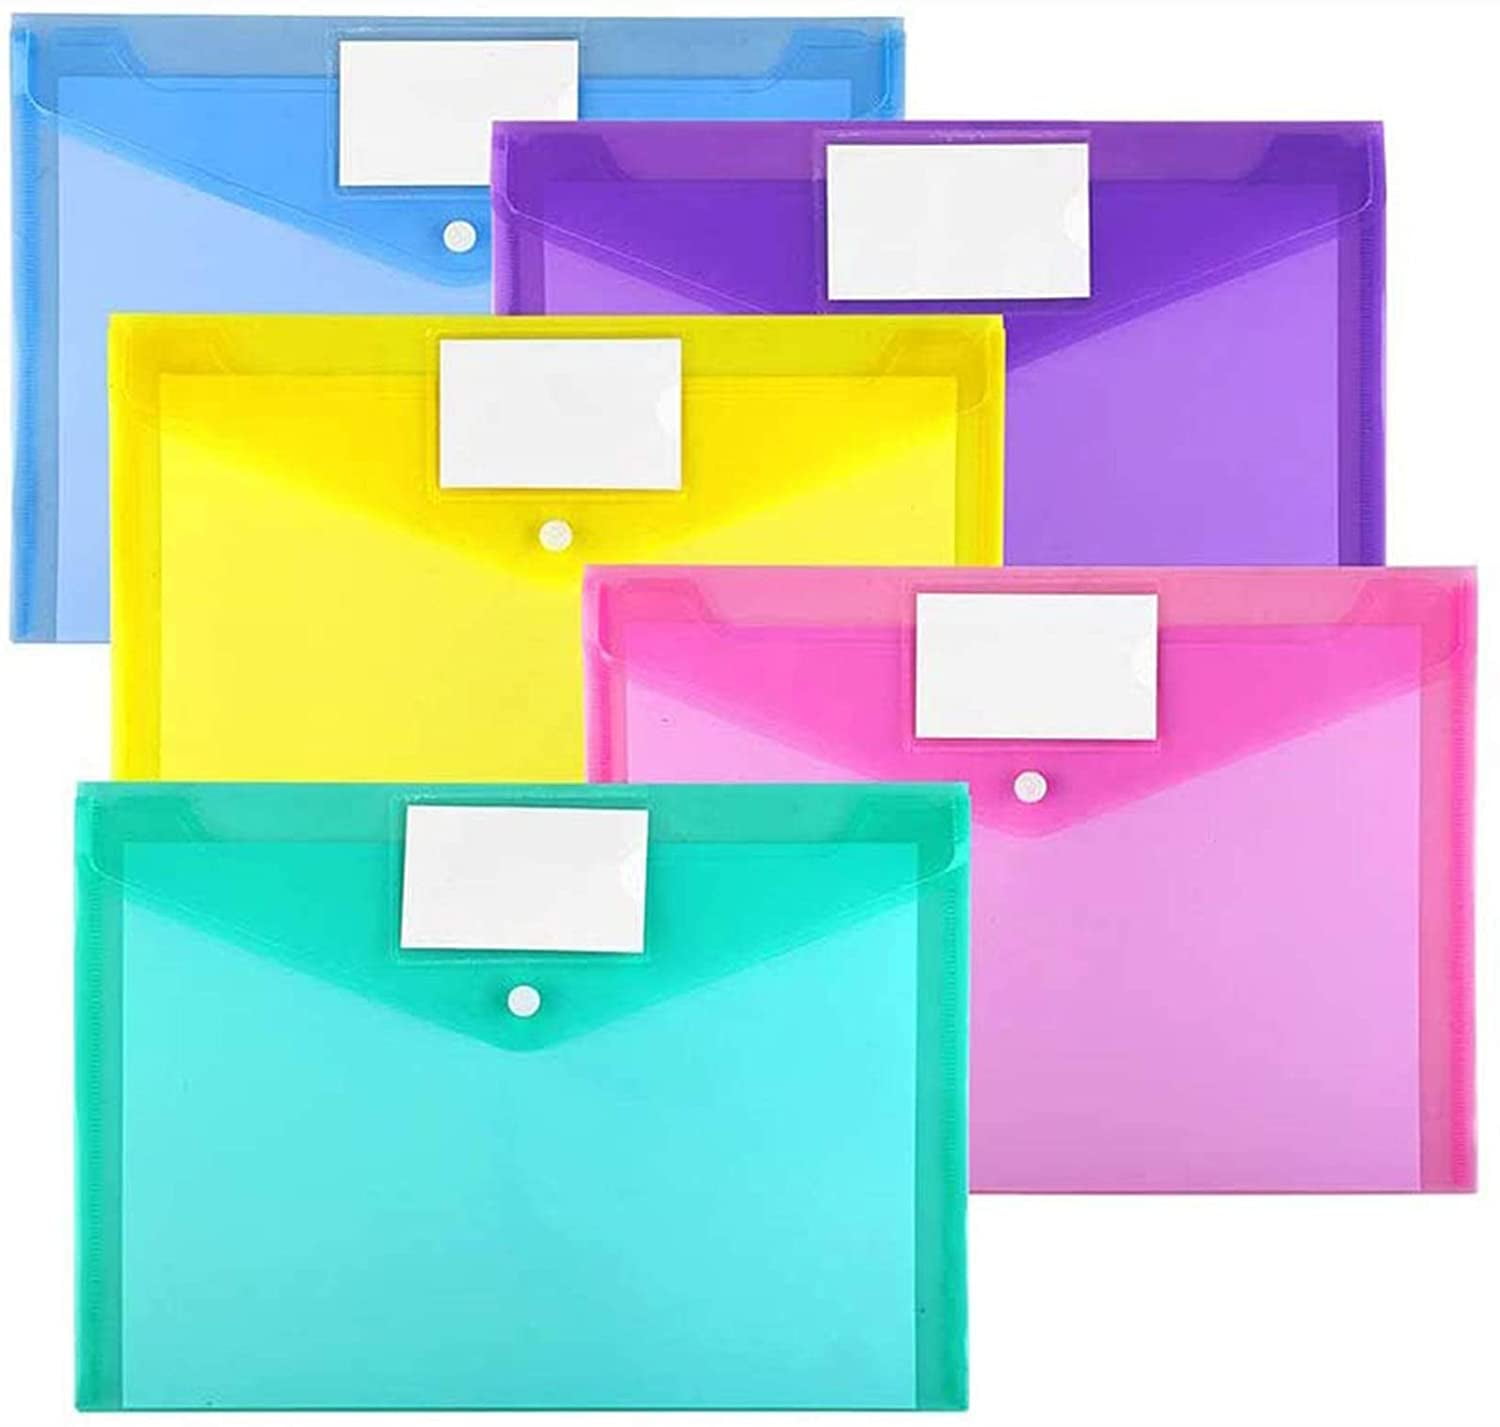 24 Packs Plastic File Envelopes Colored Filling File Folders Clear Document Folders Poly Envelope Folders Transparent Project Envelope Folders A4 Letter Size with Snap Button Closure 6 Colors 